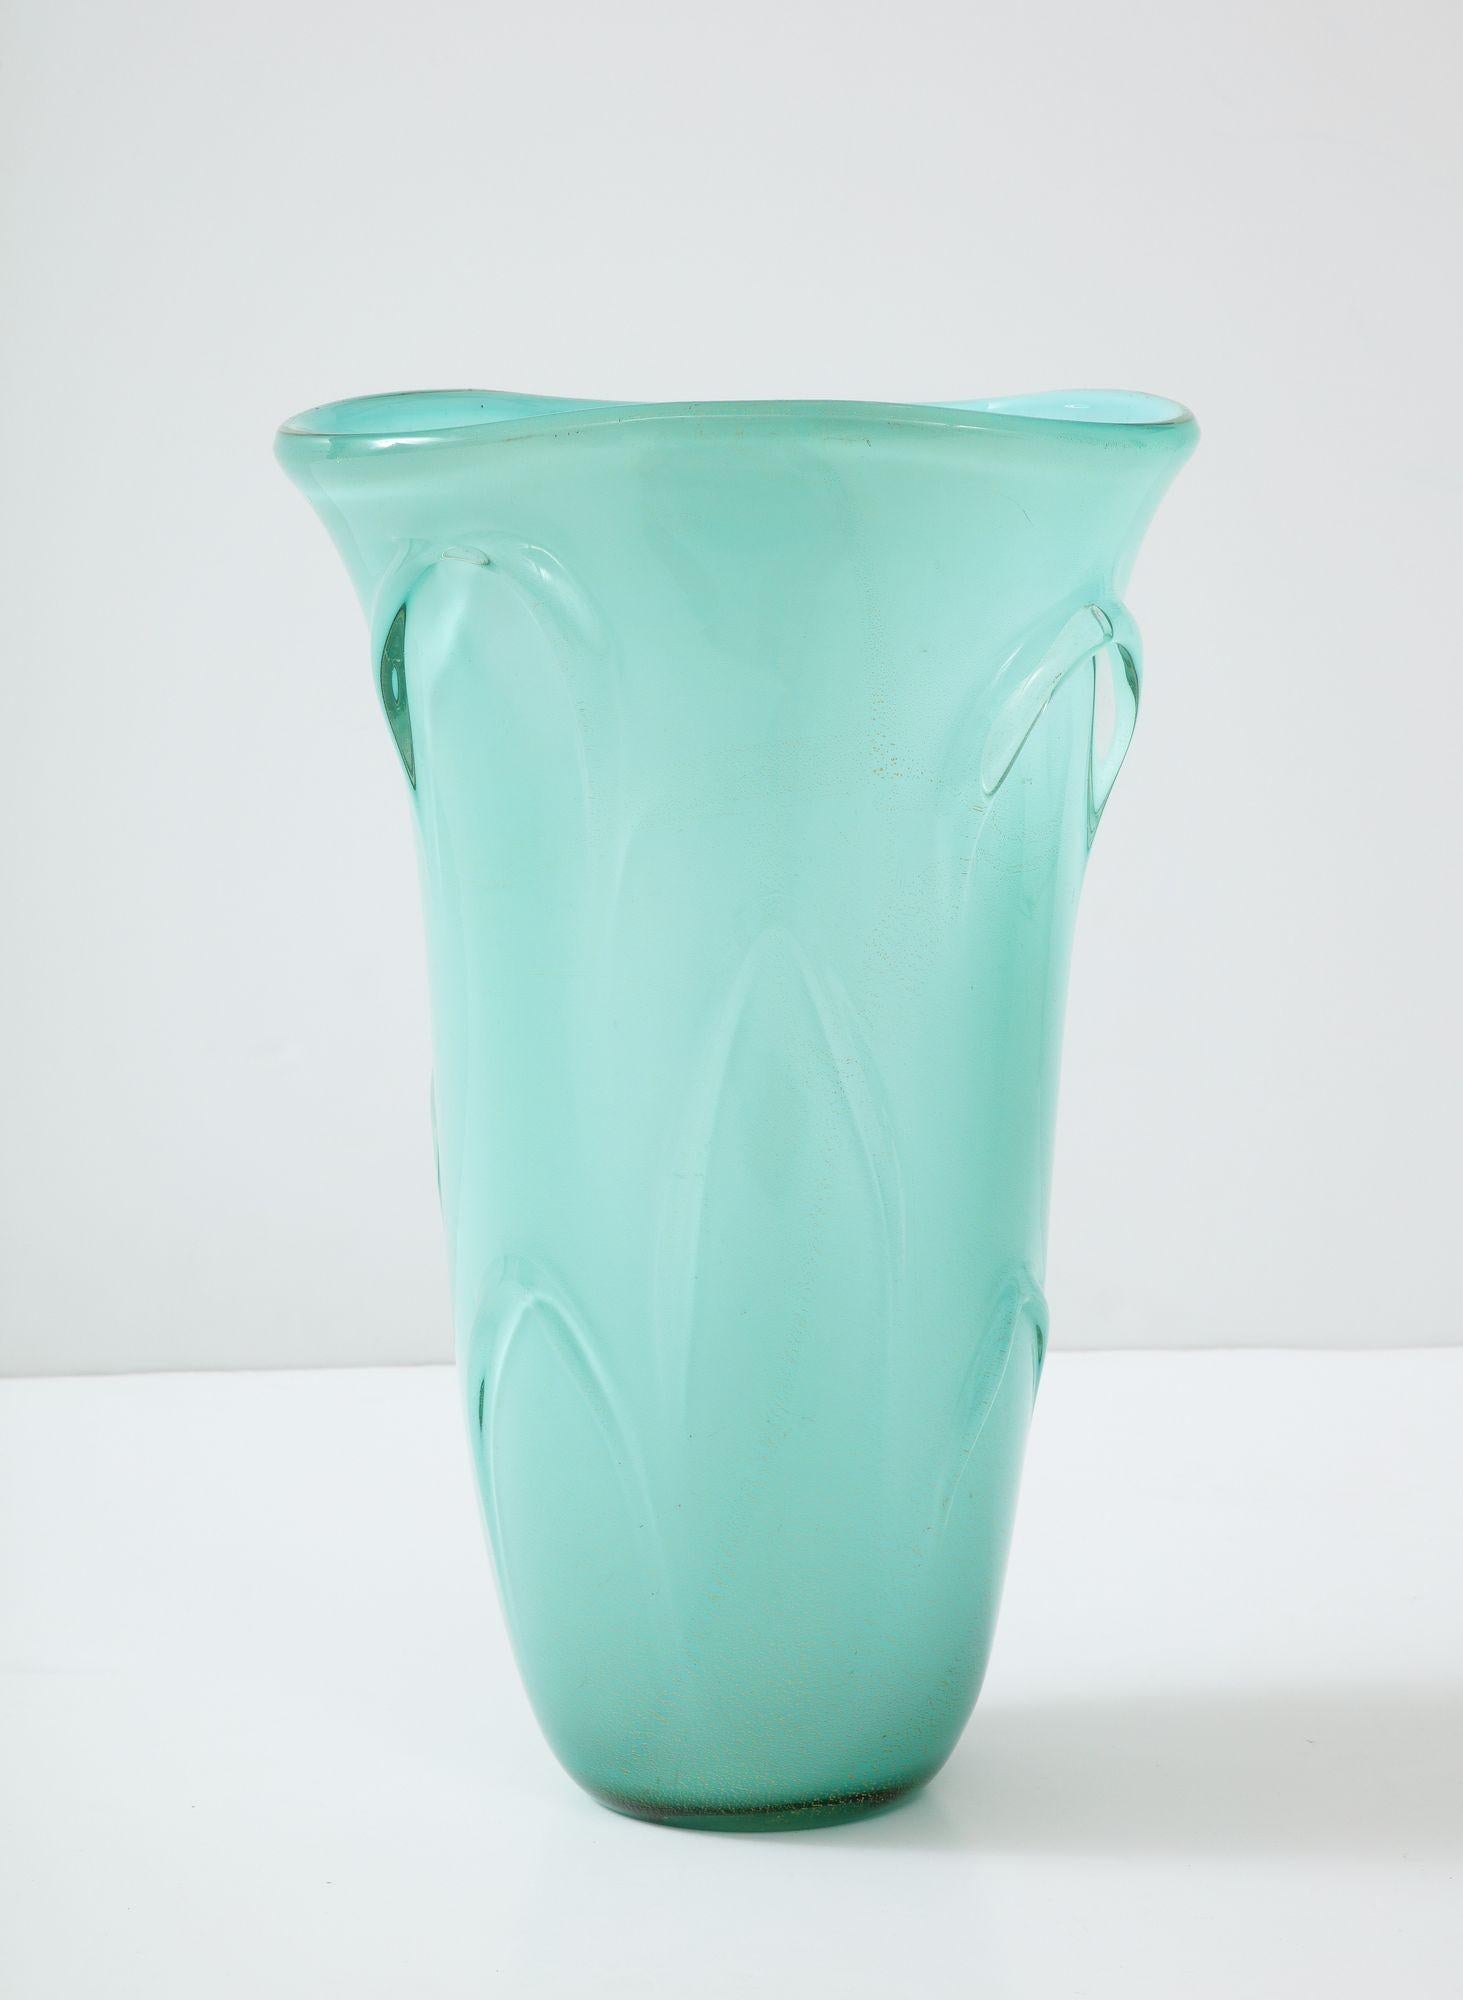 A exquisite Murano vase in Sea Green. Possibly Barovier.